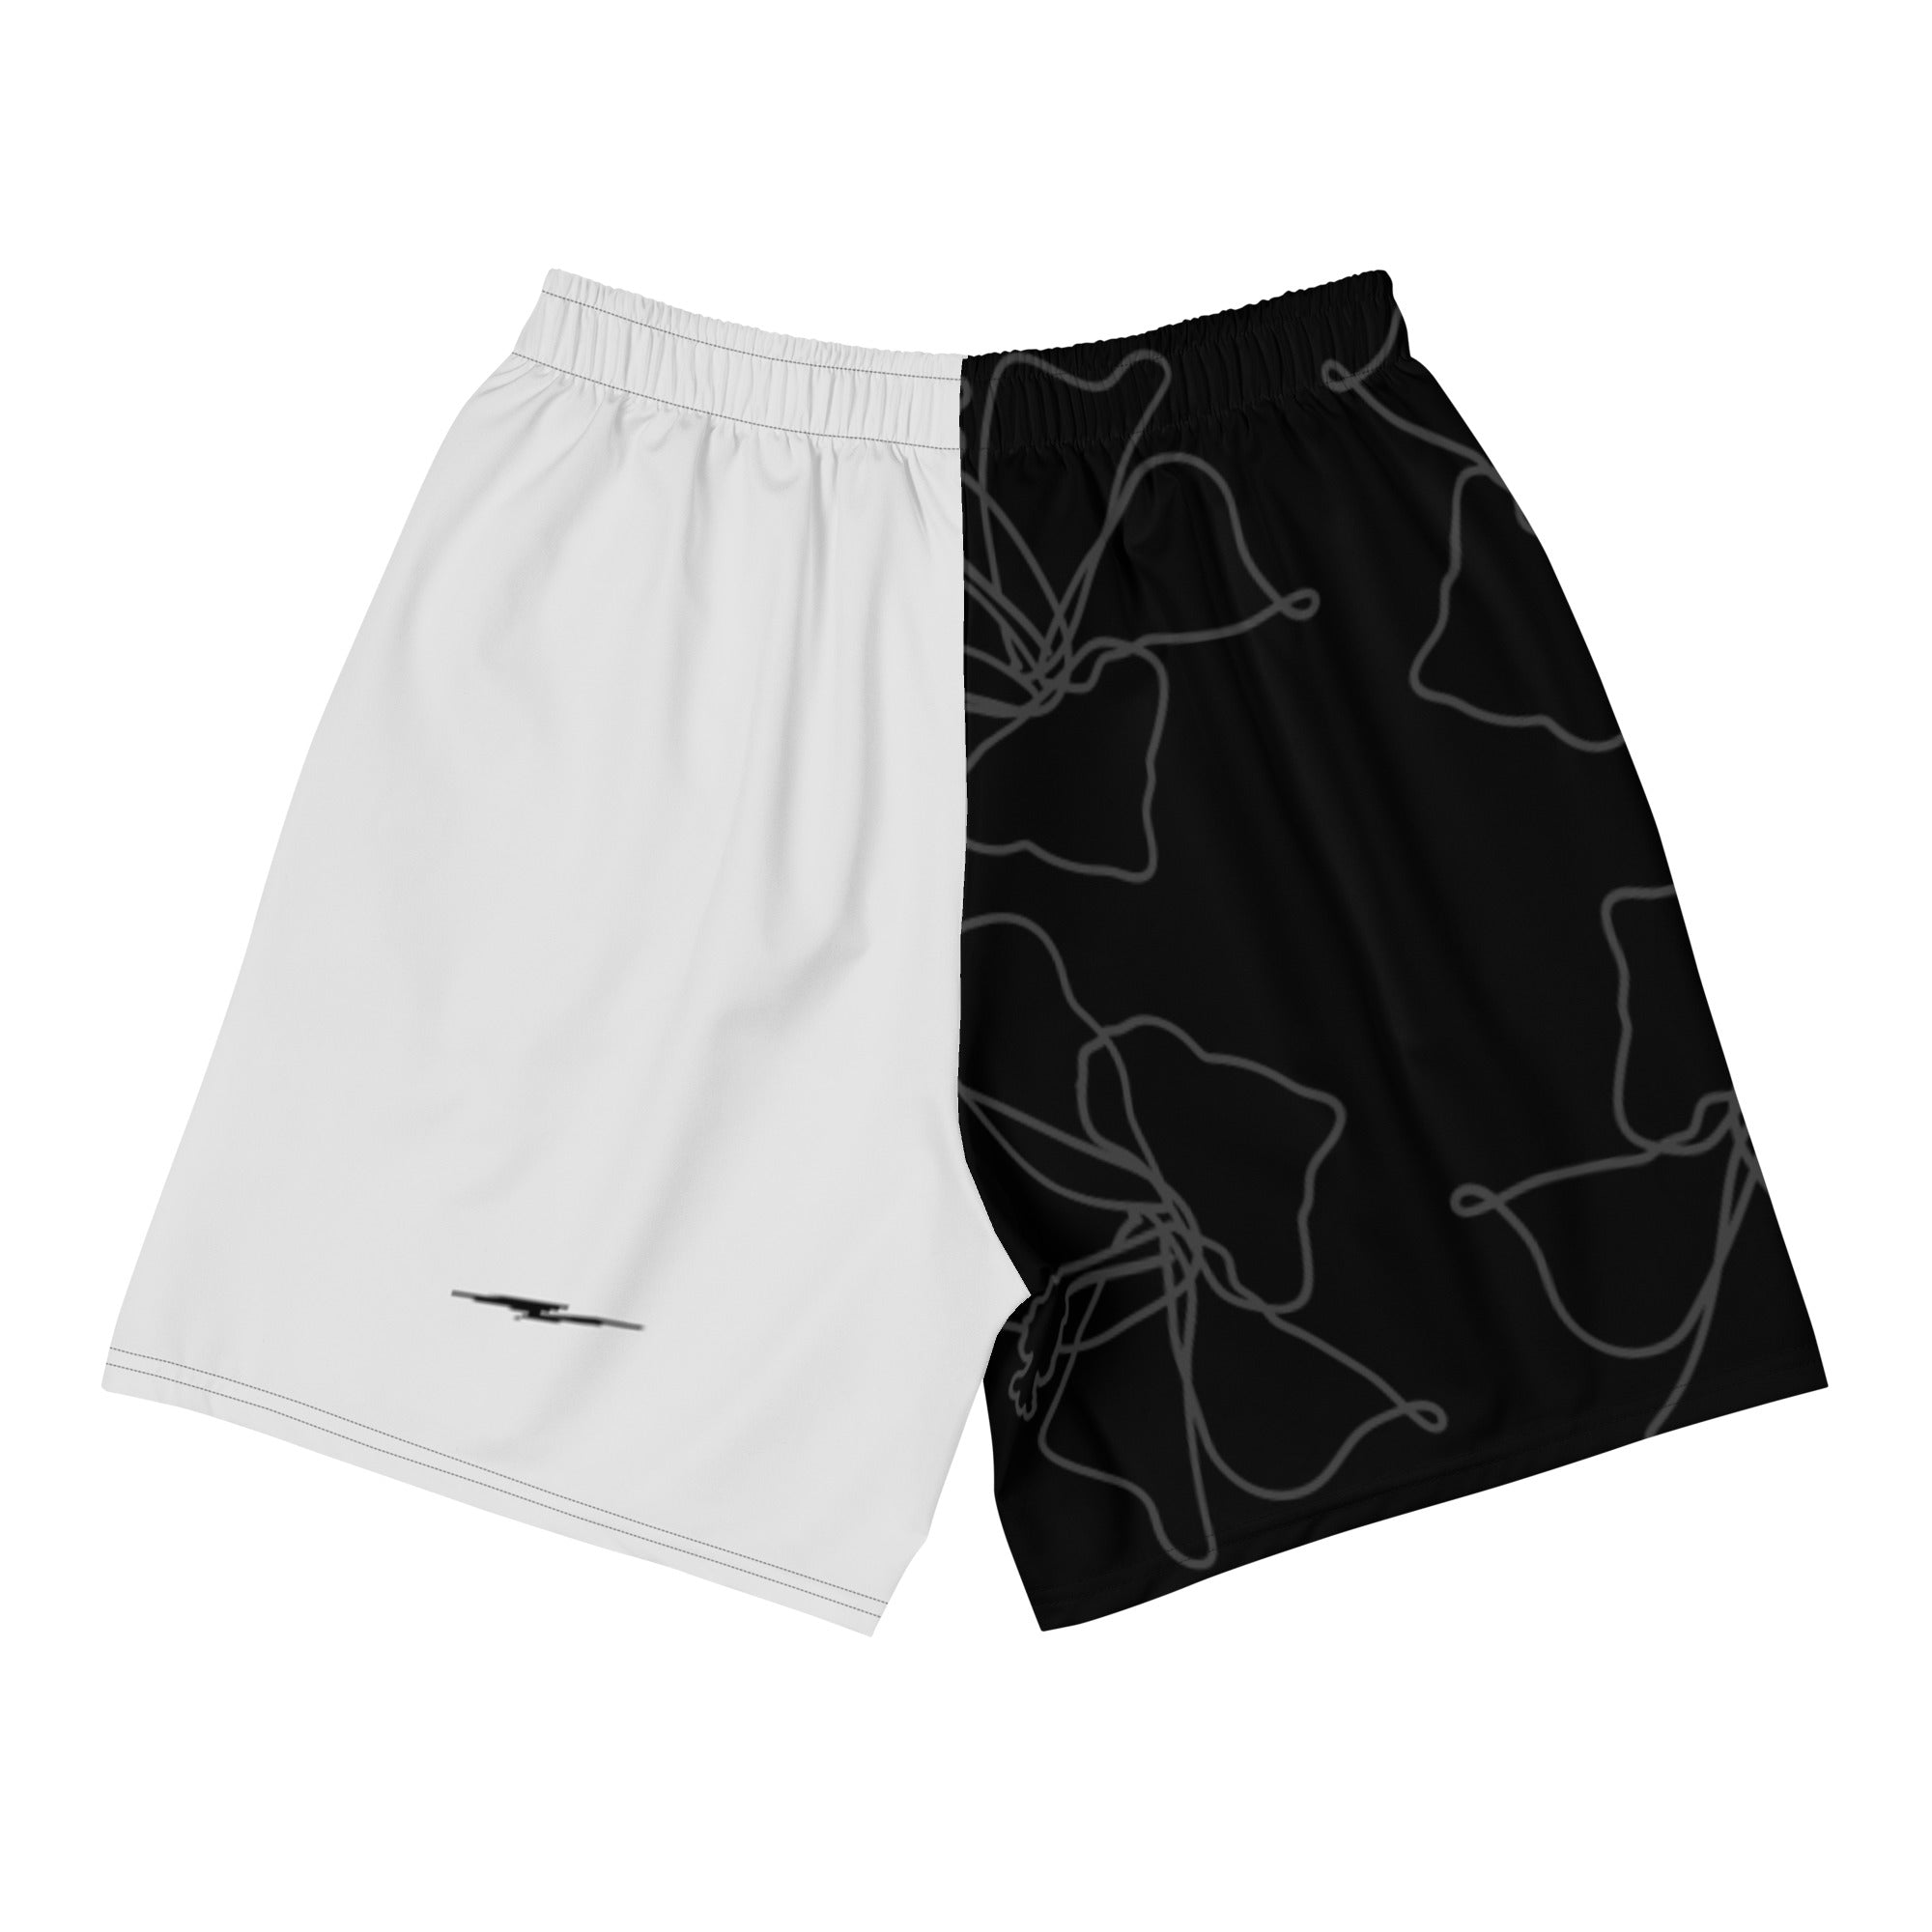 Men's Silver Blossom Athletic Shorts – The BamBoozle Project